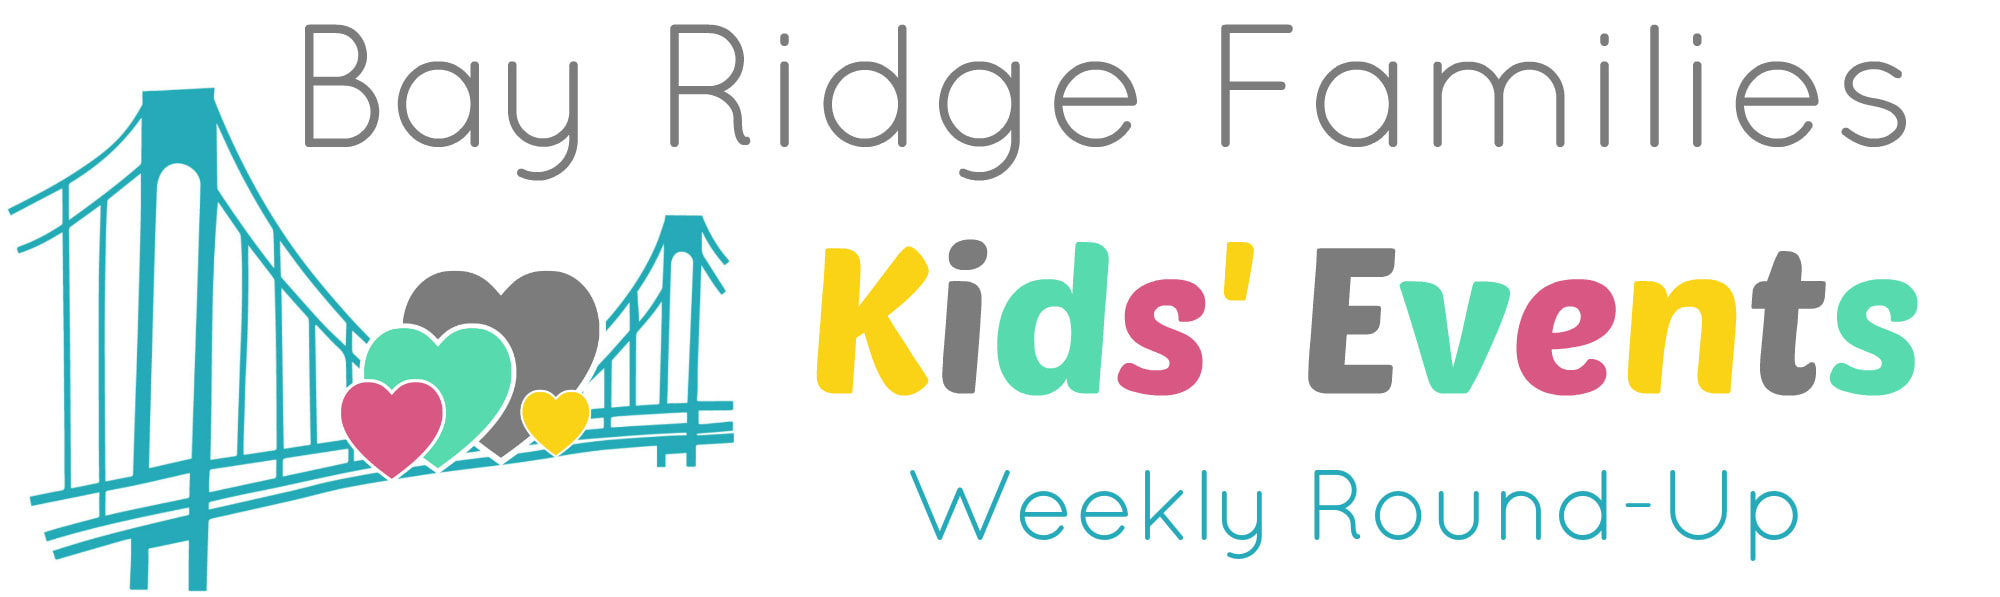 Bay Ridge Families' weekly kids events roundup for October 19 - 25, 2017